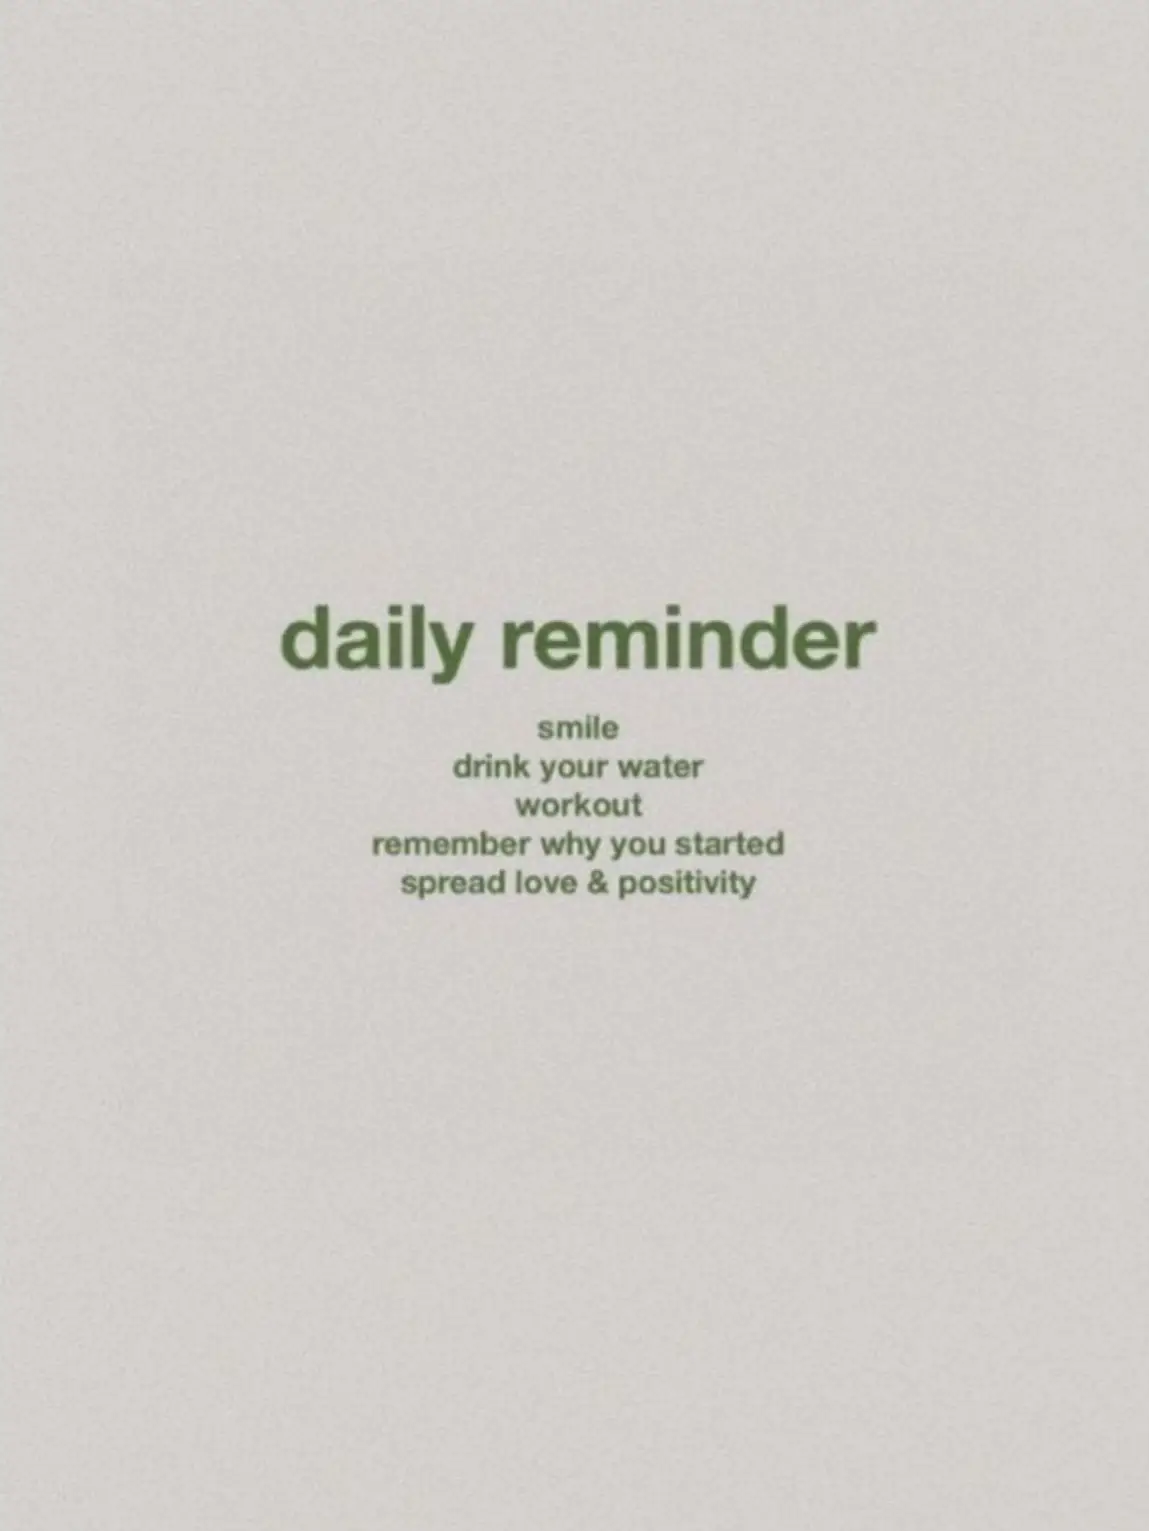  A green and white reminder to drink water, workout, and spread positivity.